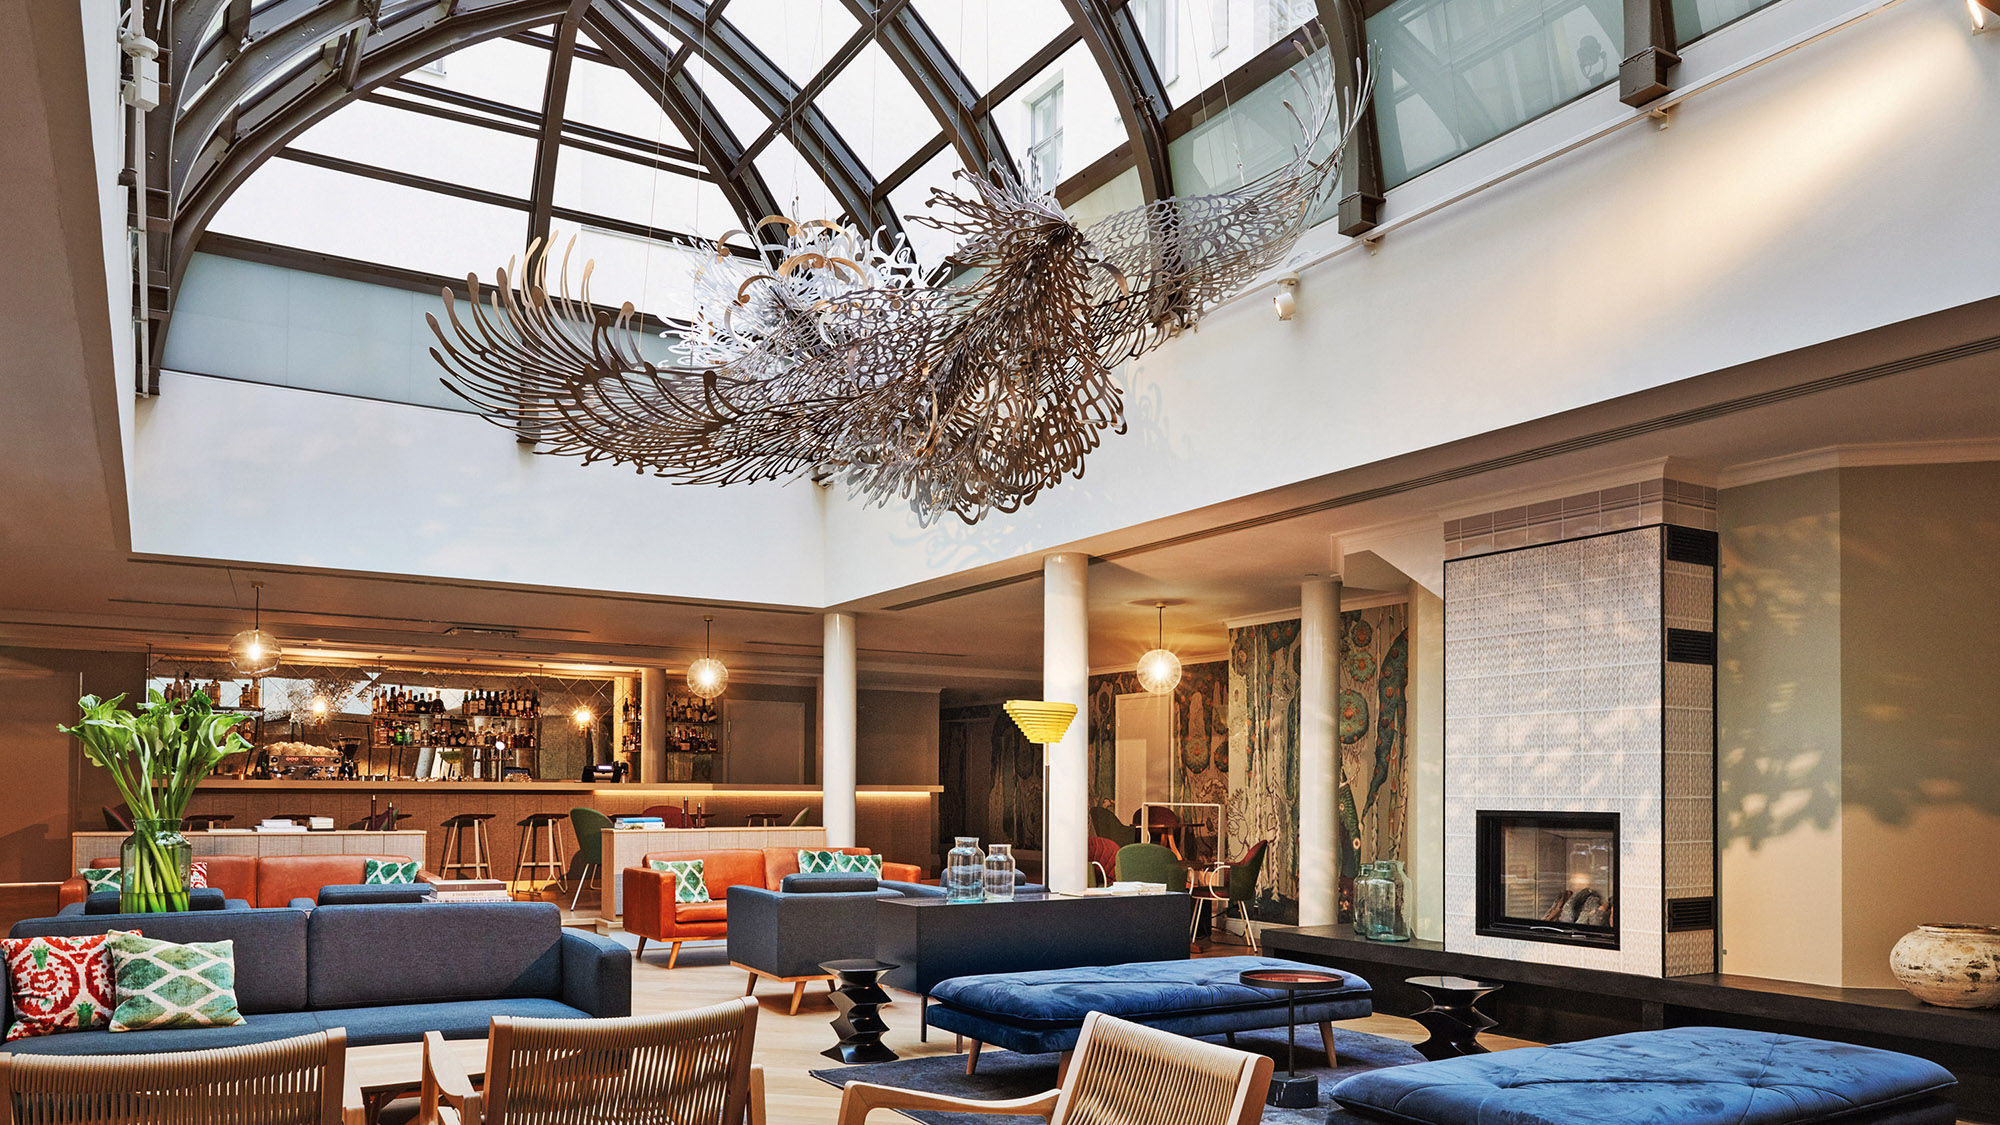 The St. George Hotel strives for a new level of indulgence: Travel Weekly